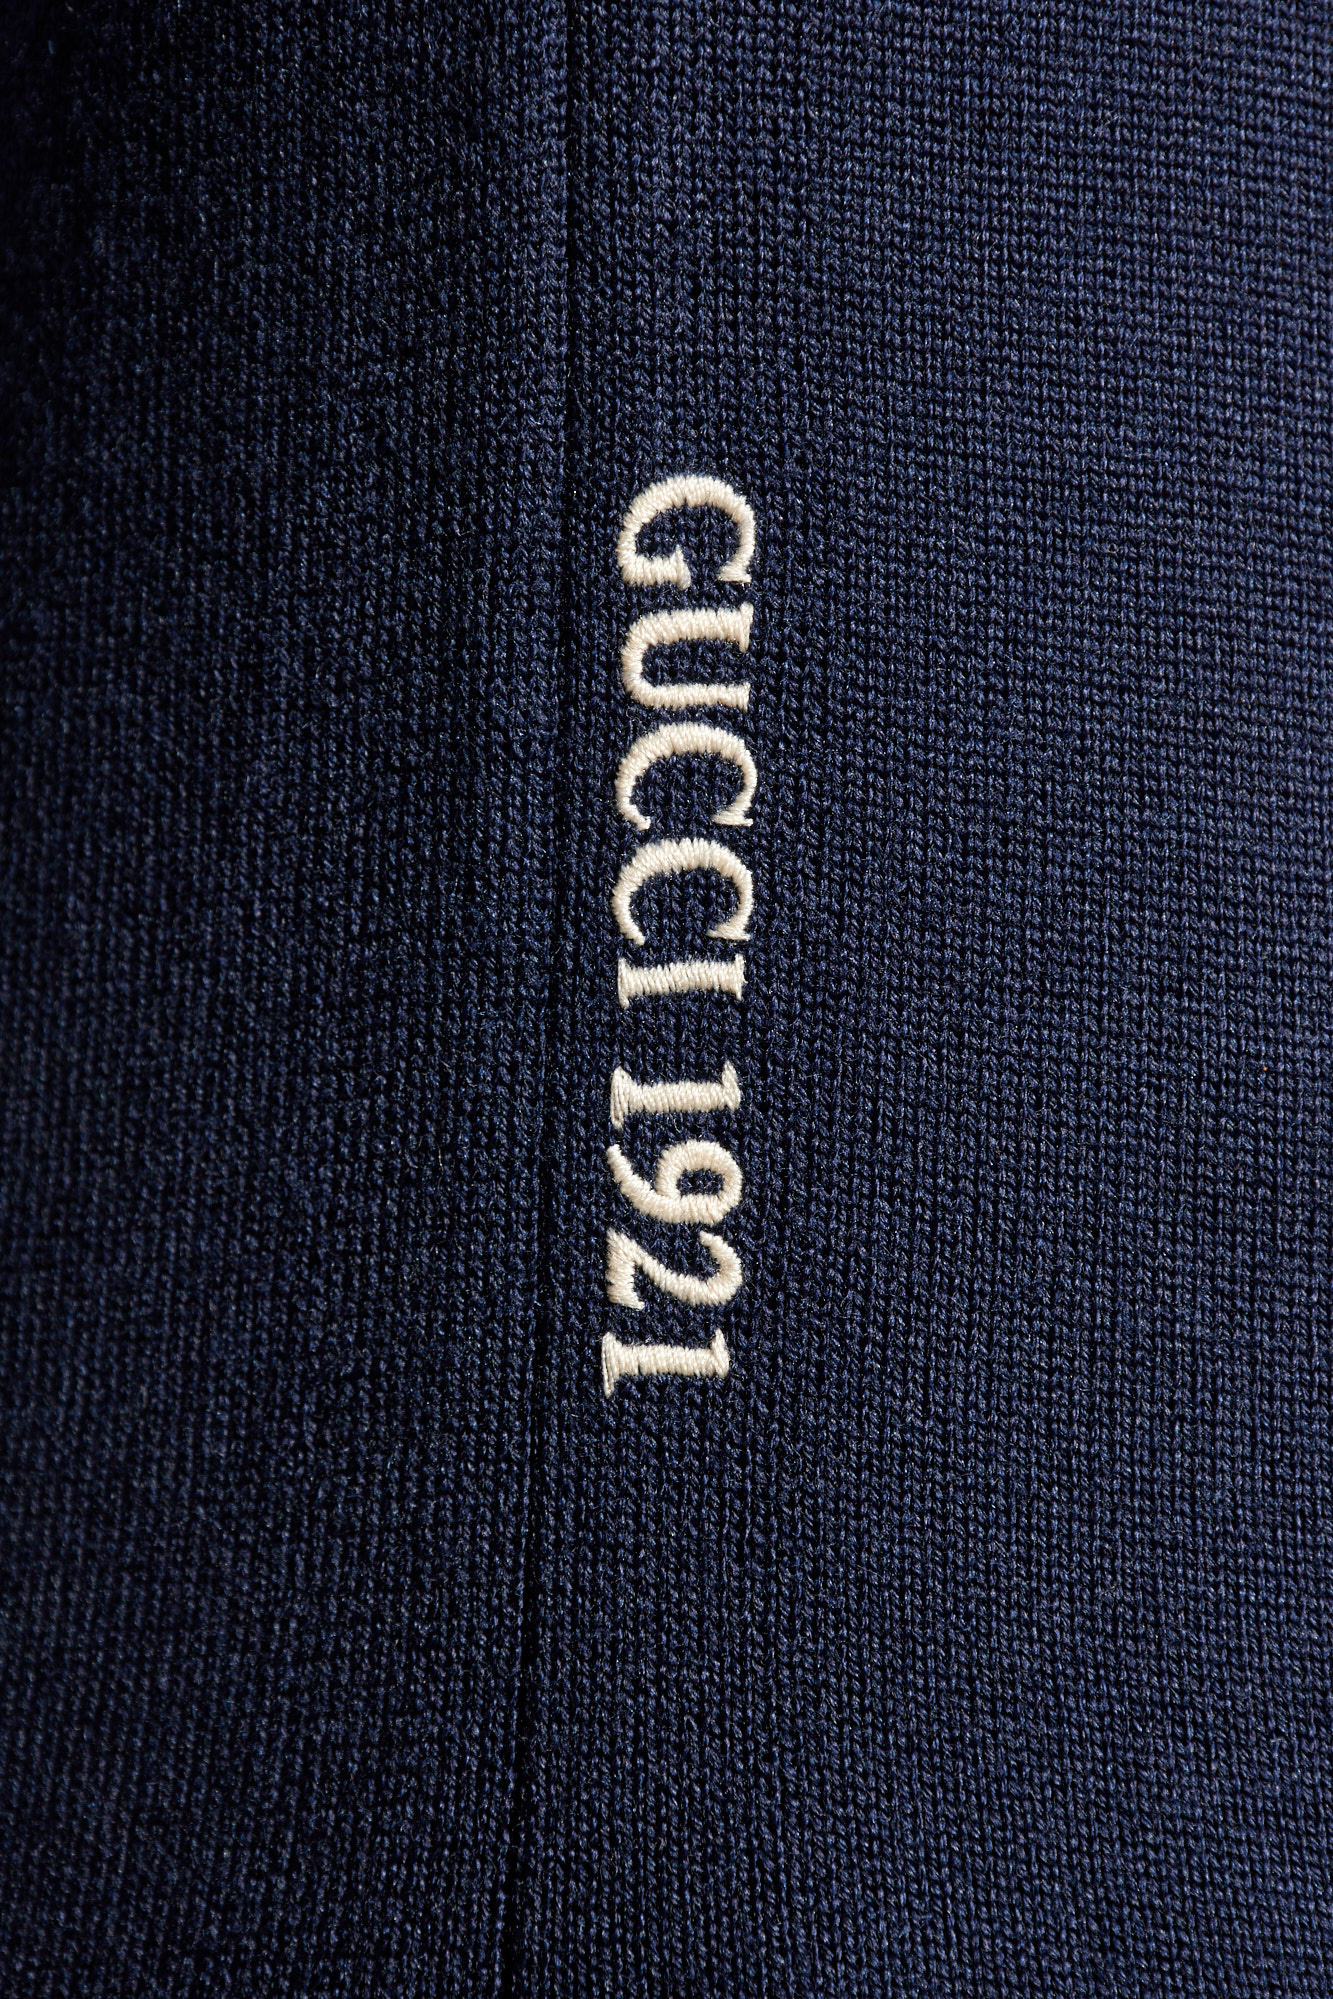 Gucci Wool turtleneck sweater with logo